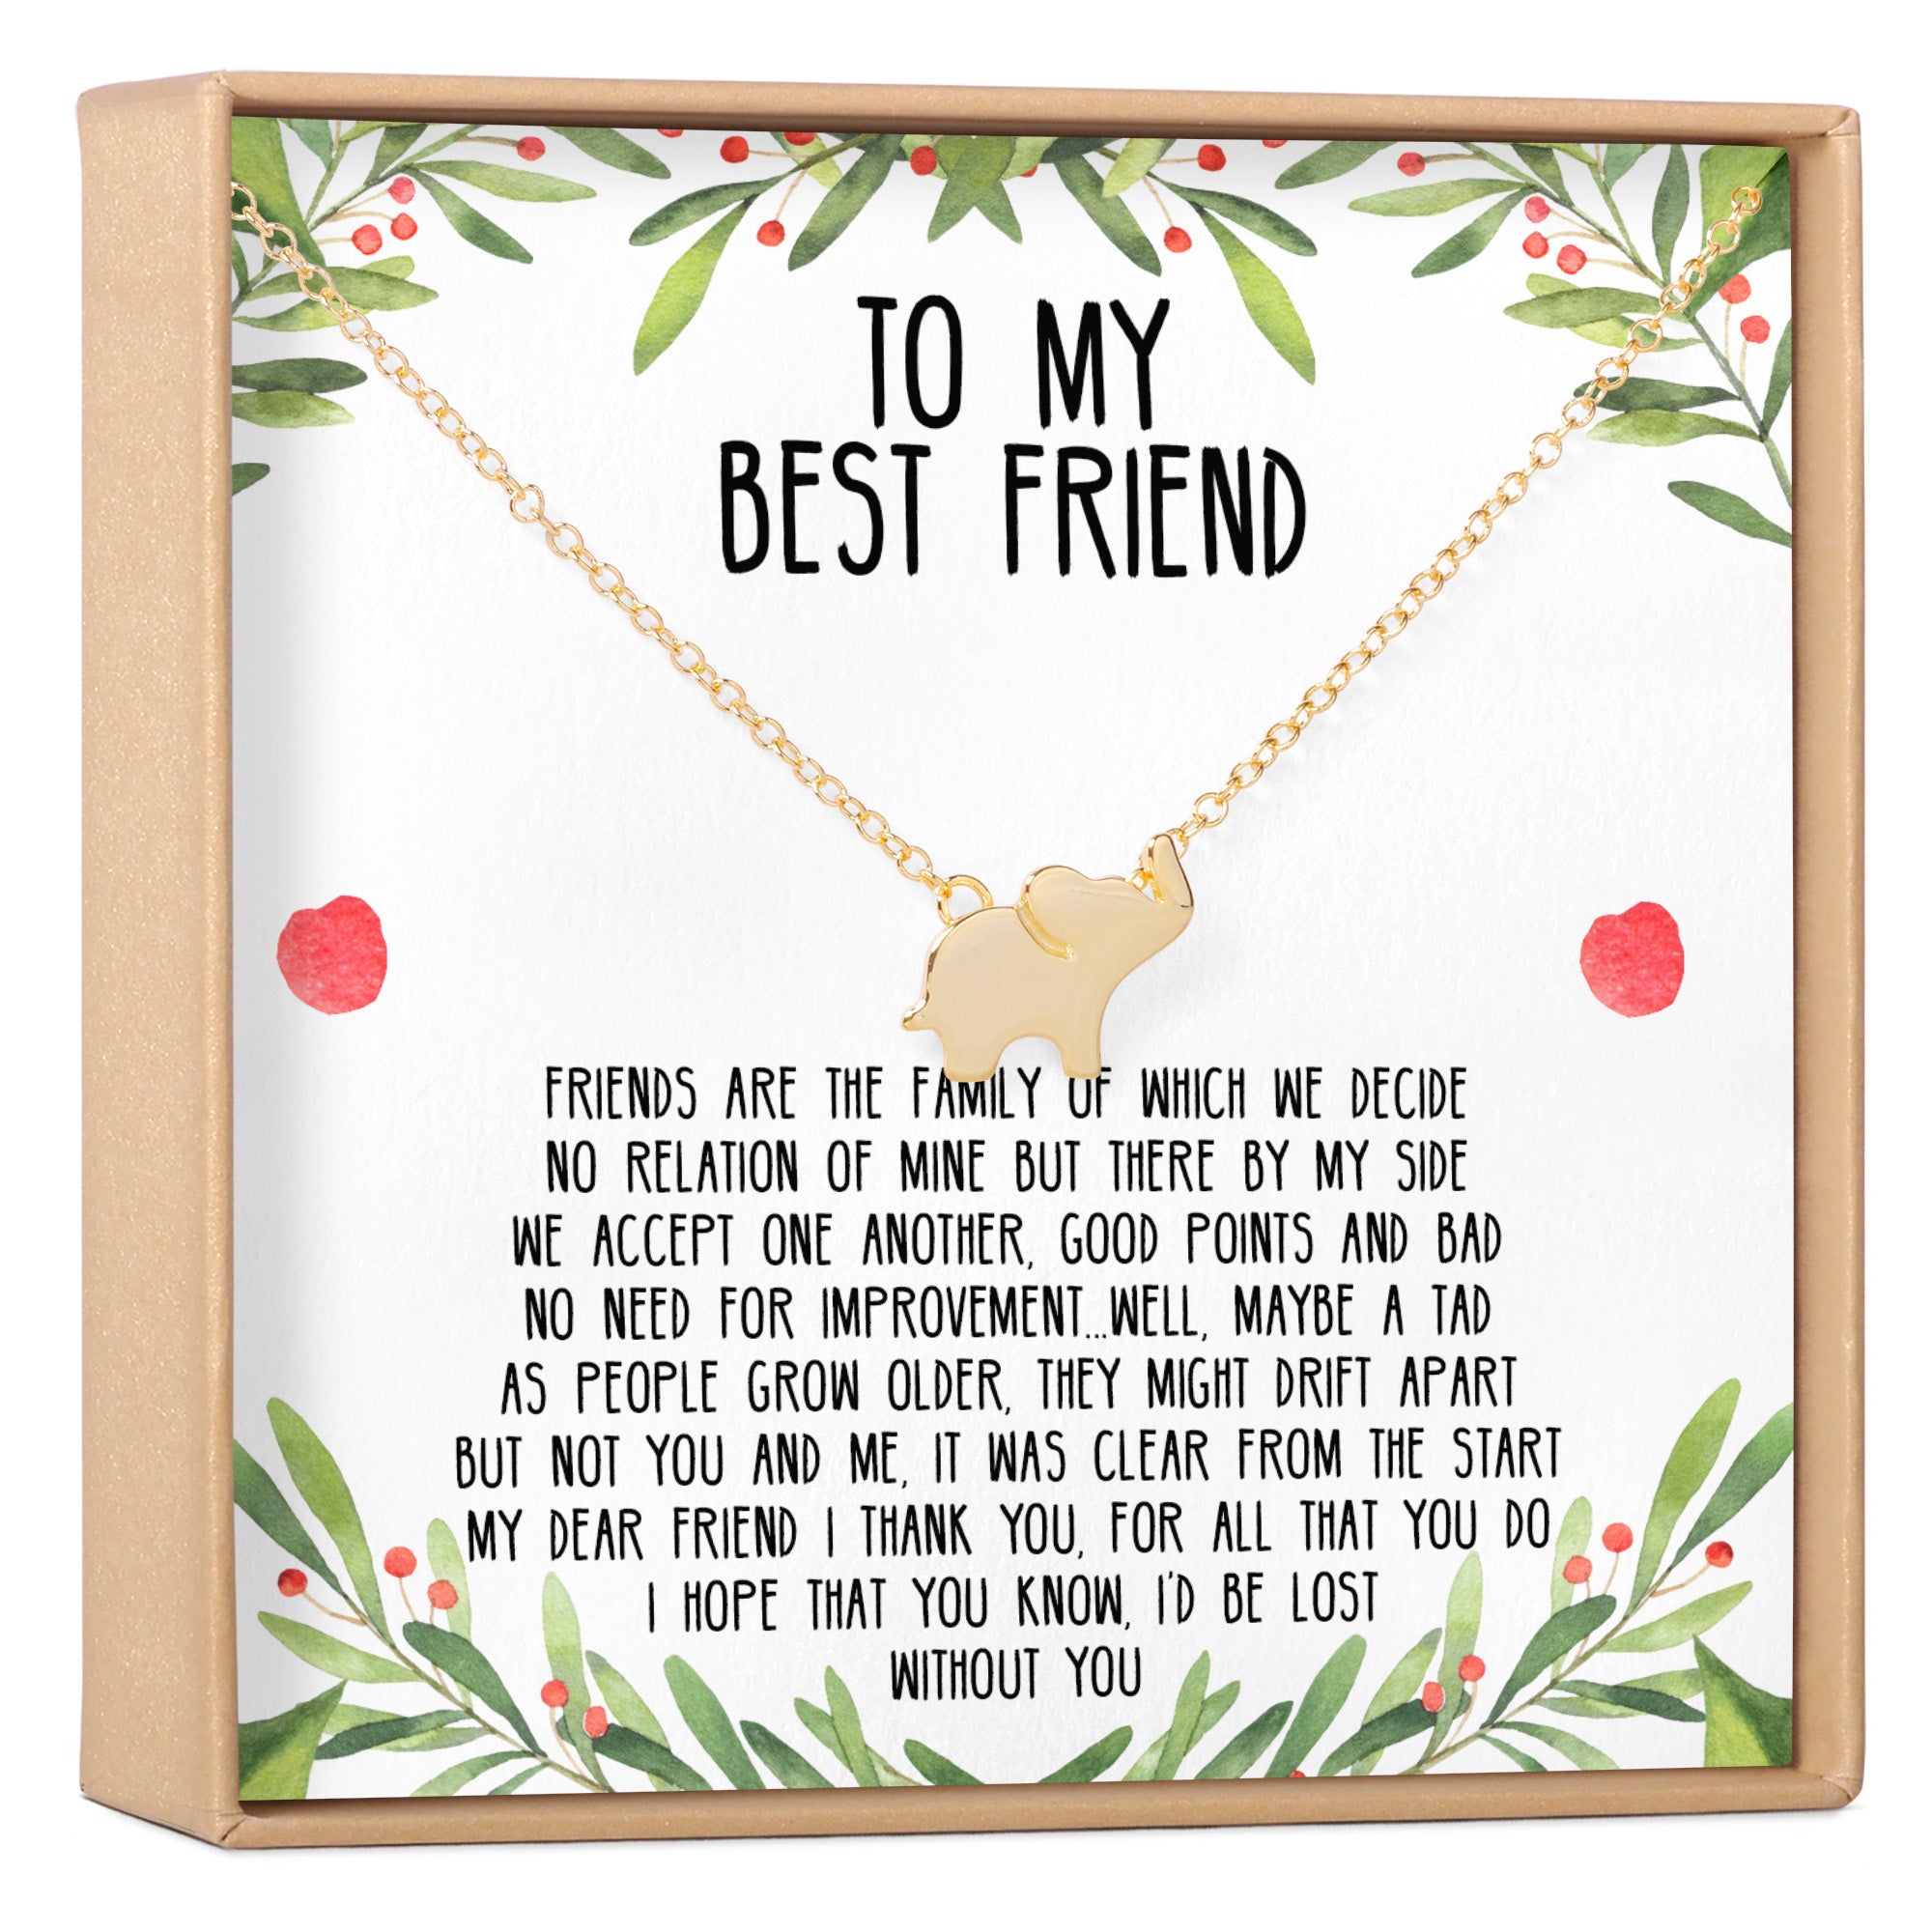 Xiahuyu Best Friend Gift Friendship Gifts for Best India | Ubuy